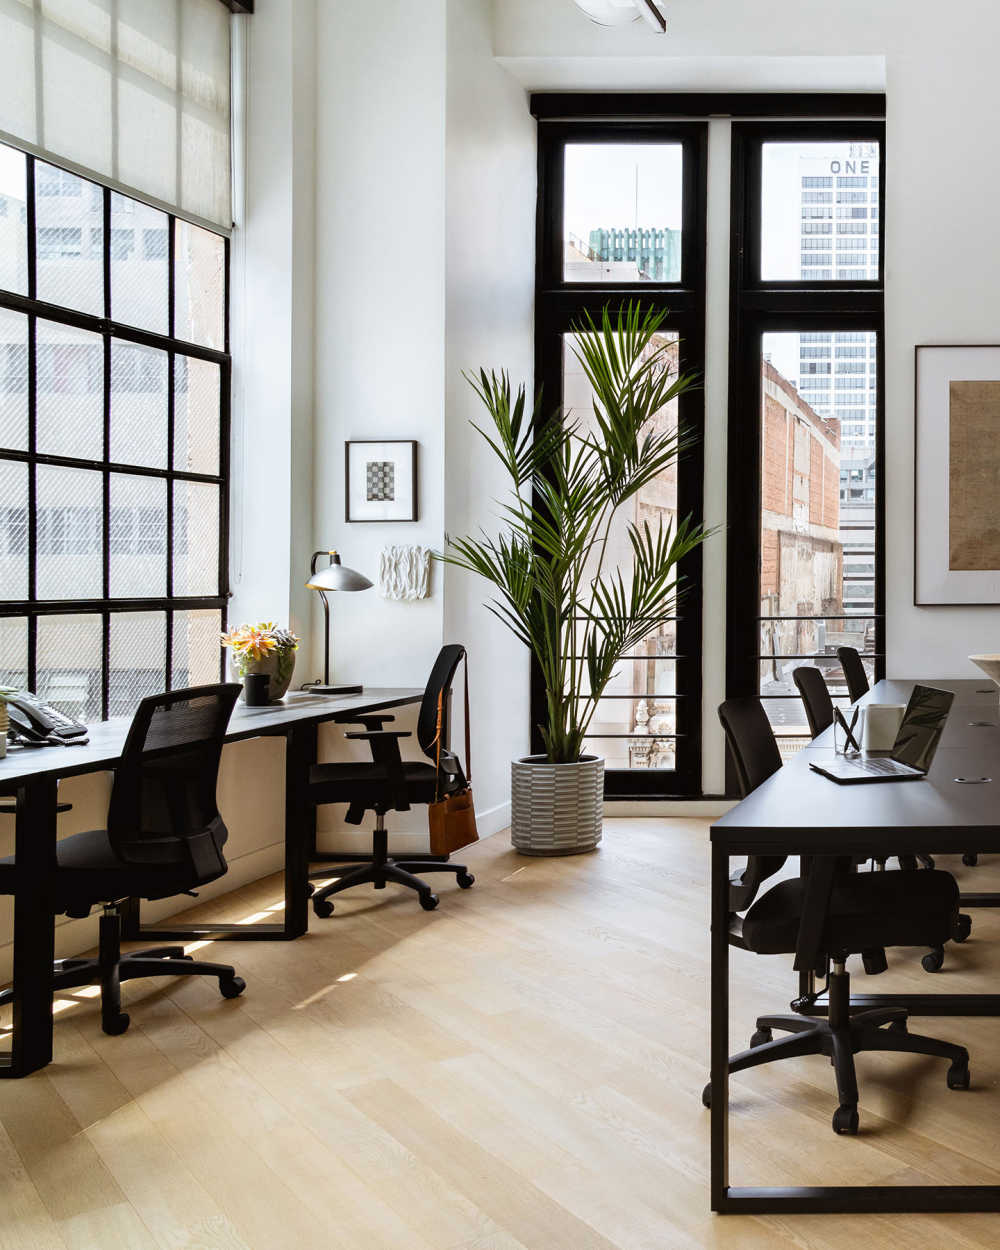 Bond Collective - 60 Broad | Shared Office Space and Coworking